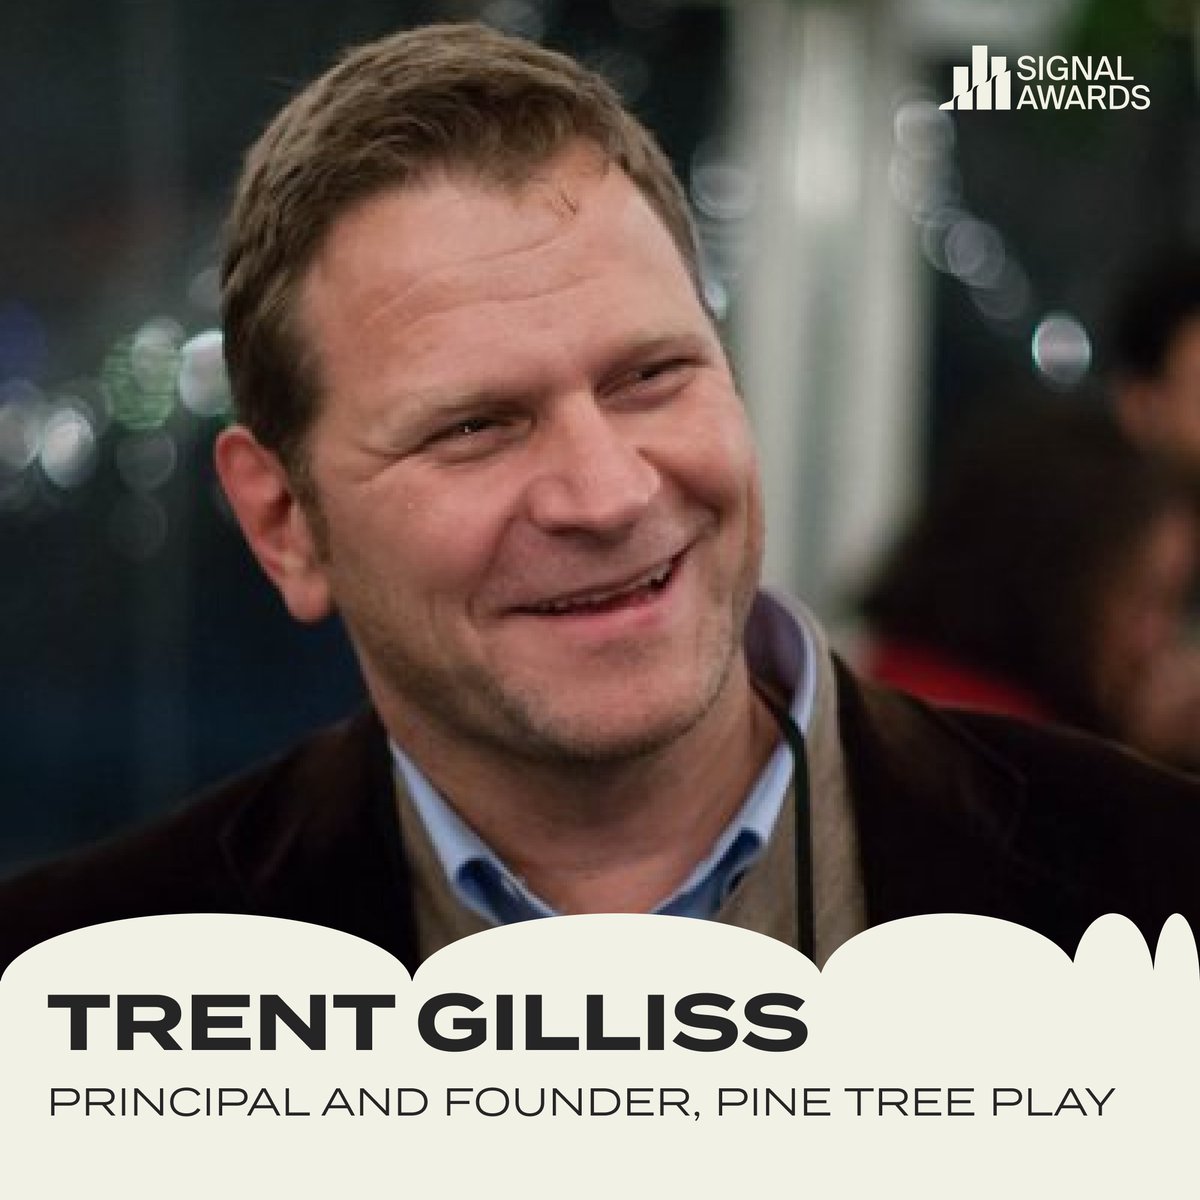 Join us in spotlighting Trent Gilliss, Founder and Principal of Pine Tree Play, and a Signal Awards judge! 🎧 Learn more about our incredible judges at signalaward.com and enter your podcasts before our Early Entry Deadline on May 10th!